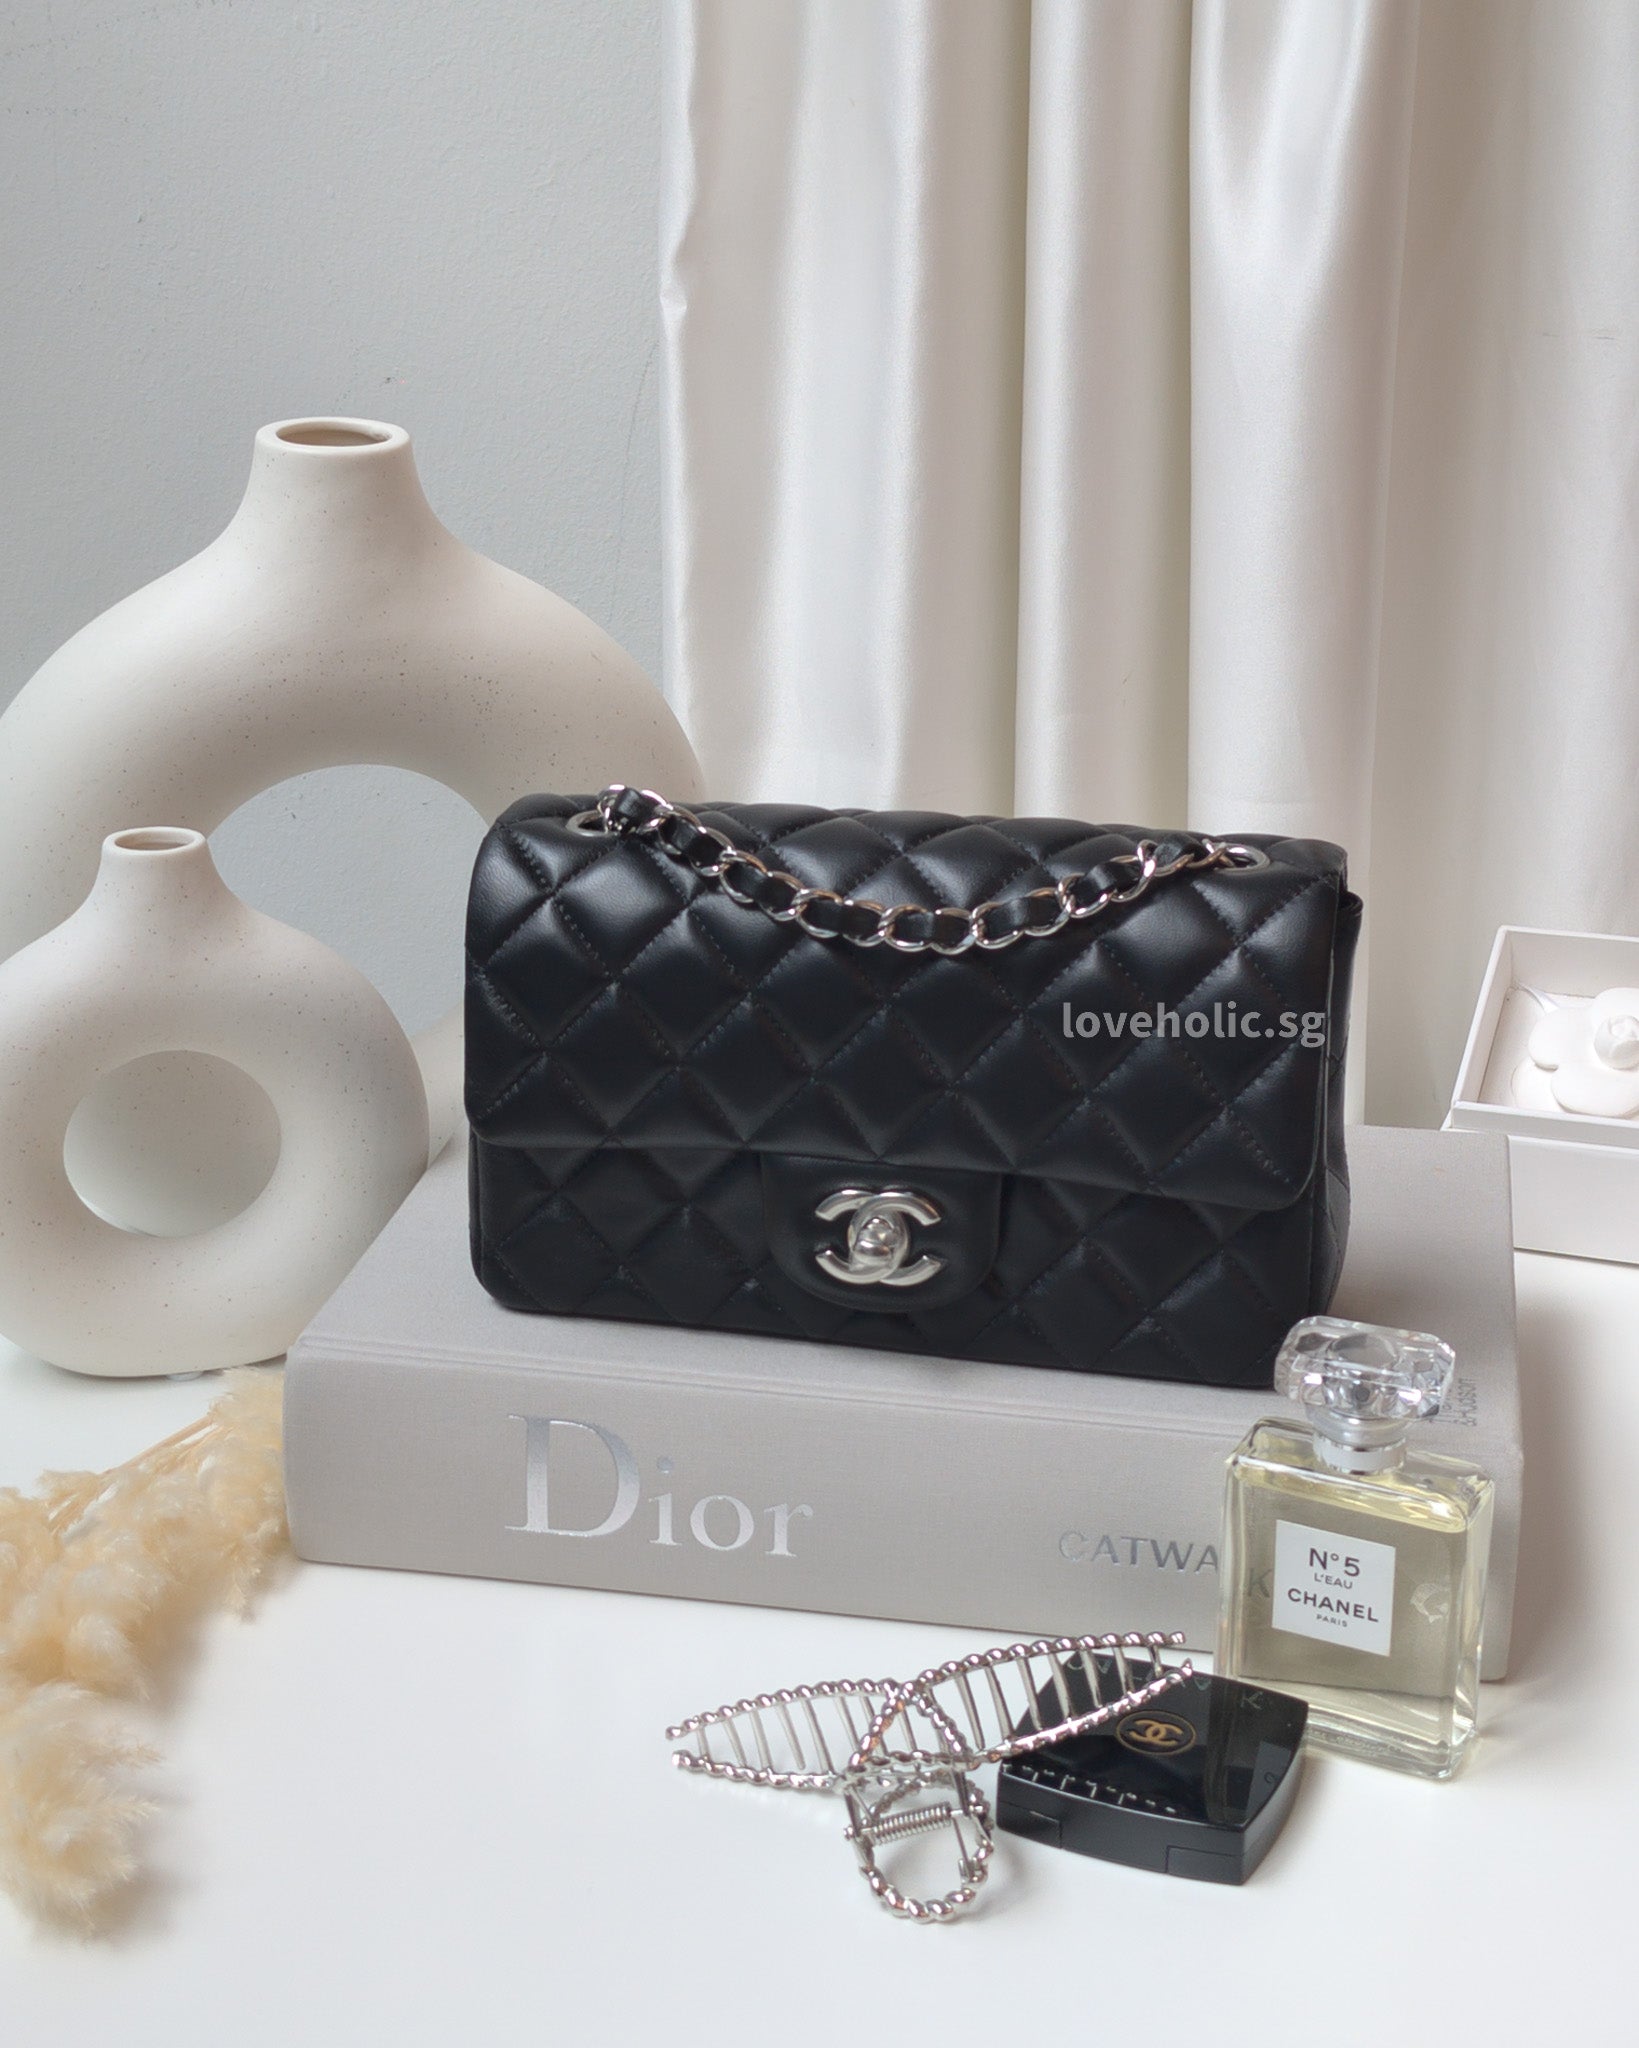 CHANEL CLASSIC LONG FLAP WALLET Caviar GHW Review & Unboxing